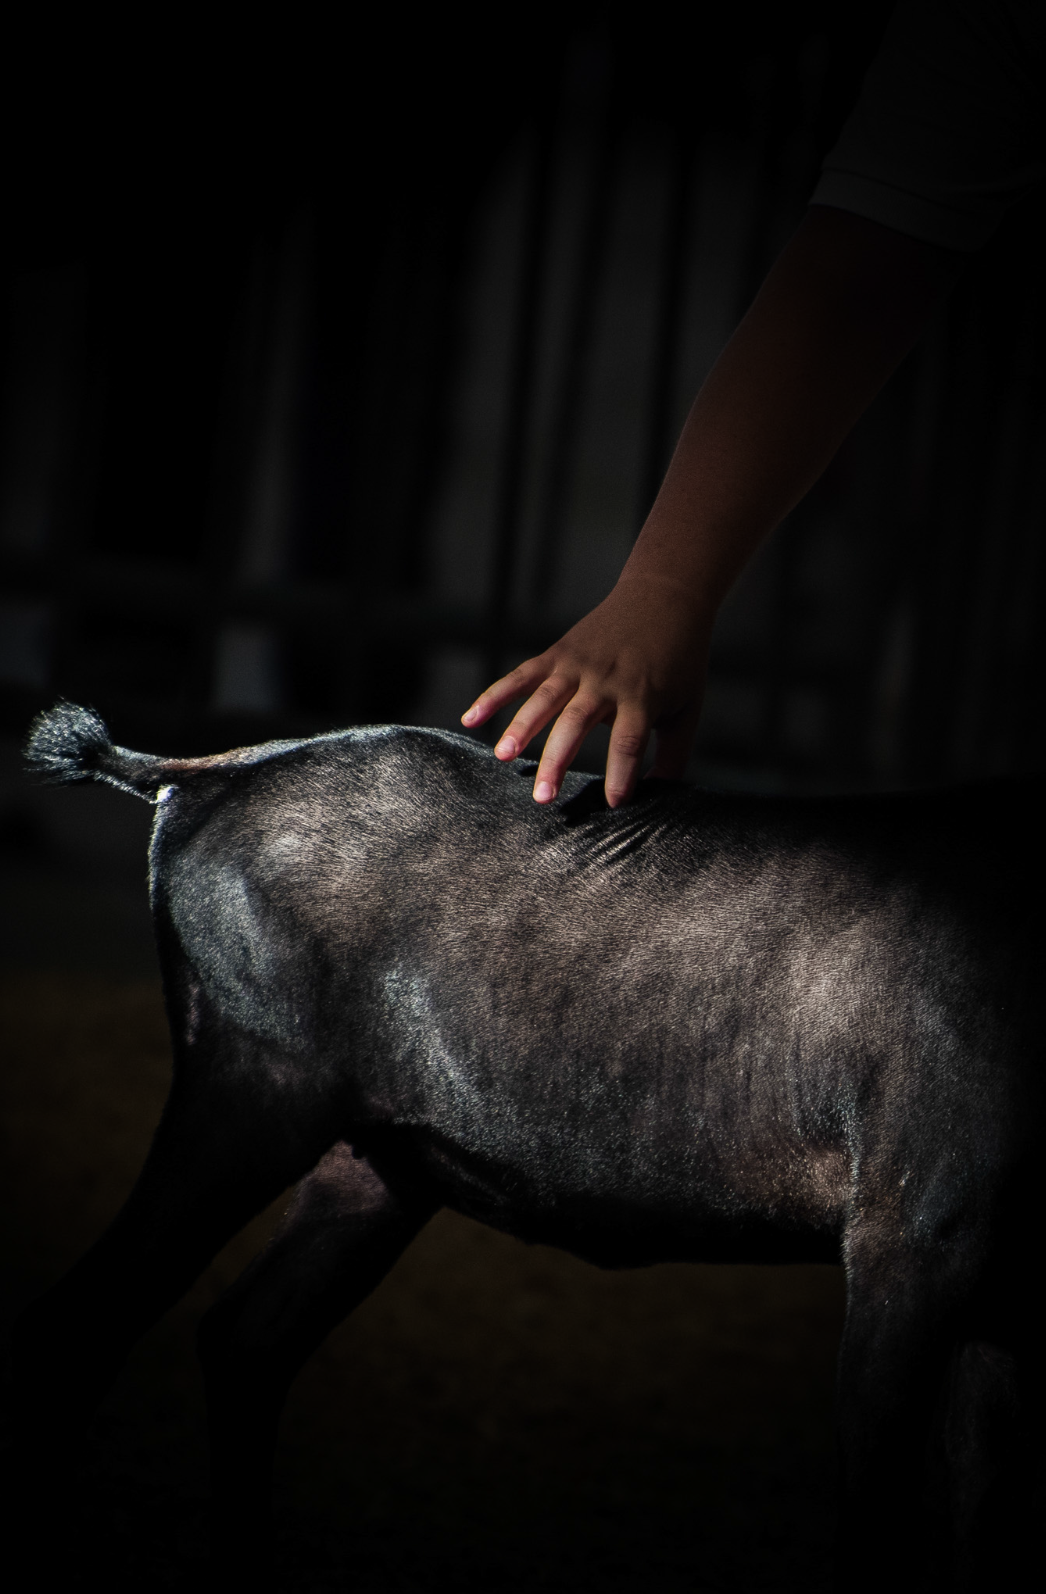  A boy squeezes the back of his goat to adjust its posture during a goat showing at the Ohio State Fair in Columbus, Ohio on July 22, 2016.&nbsp; 